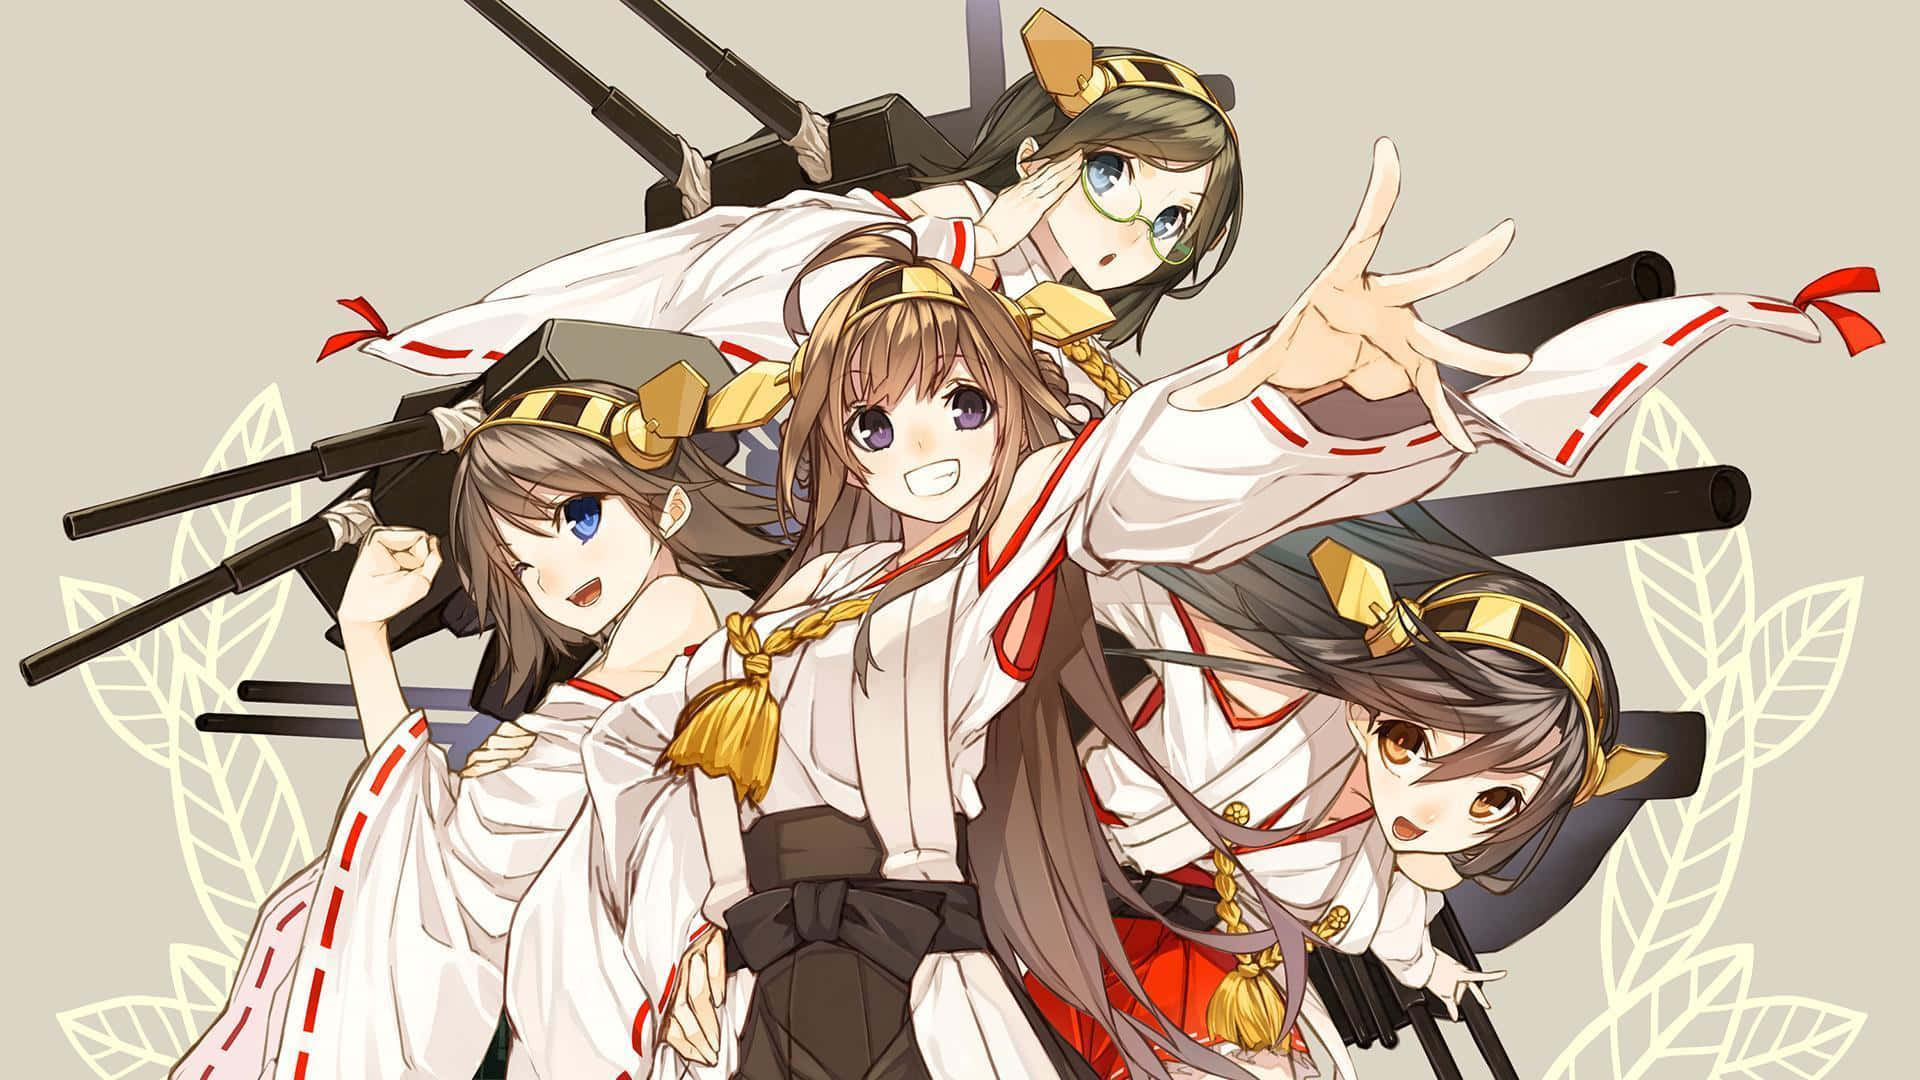 In the Game of Battleships, the Kantai Collection Sails to Victory Wallpaper